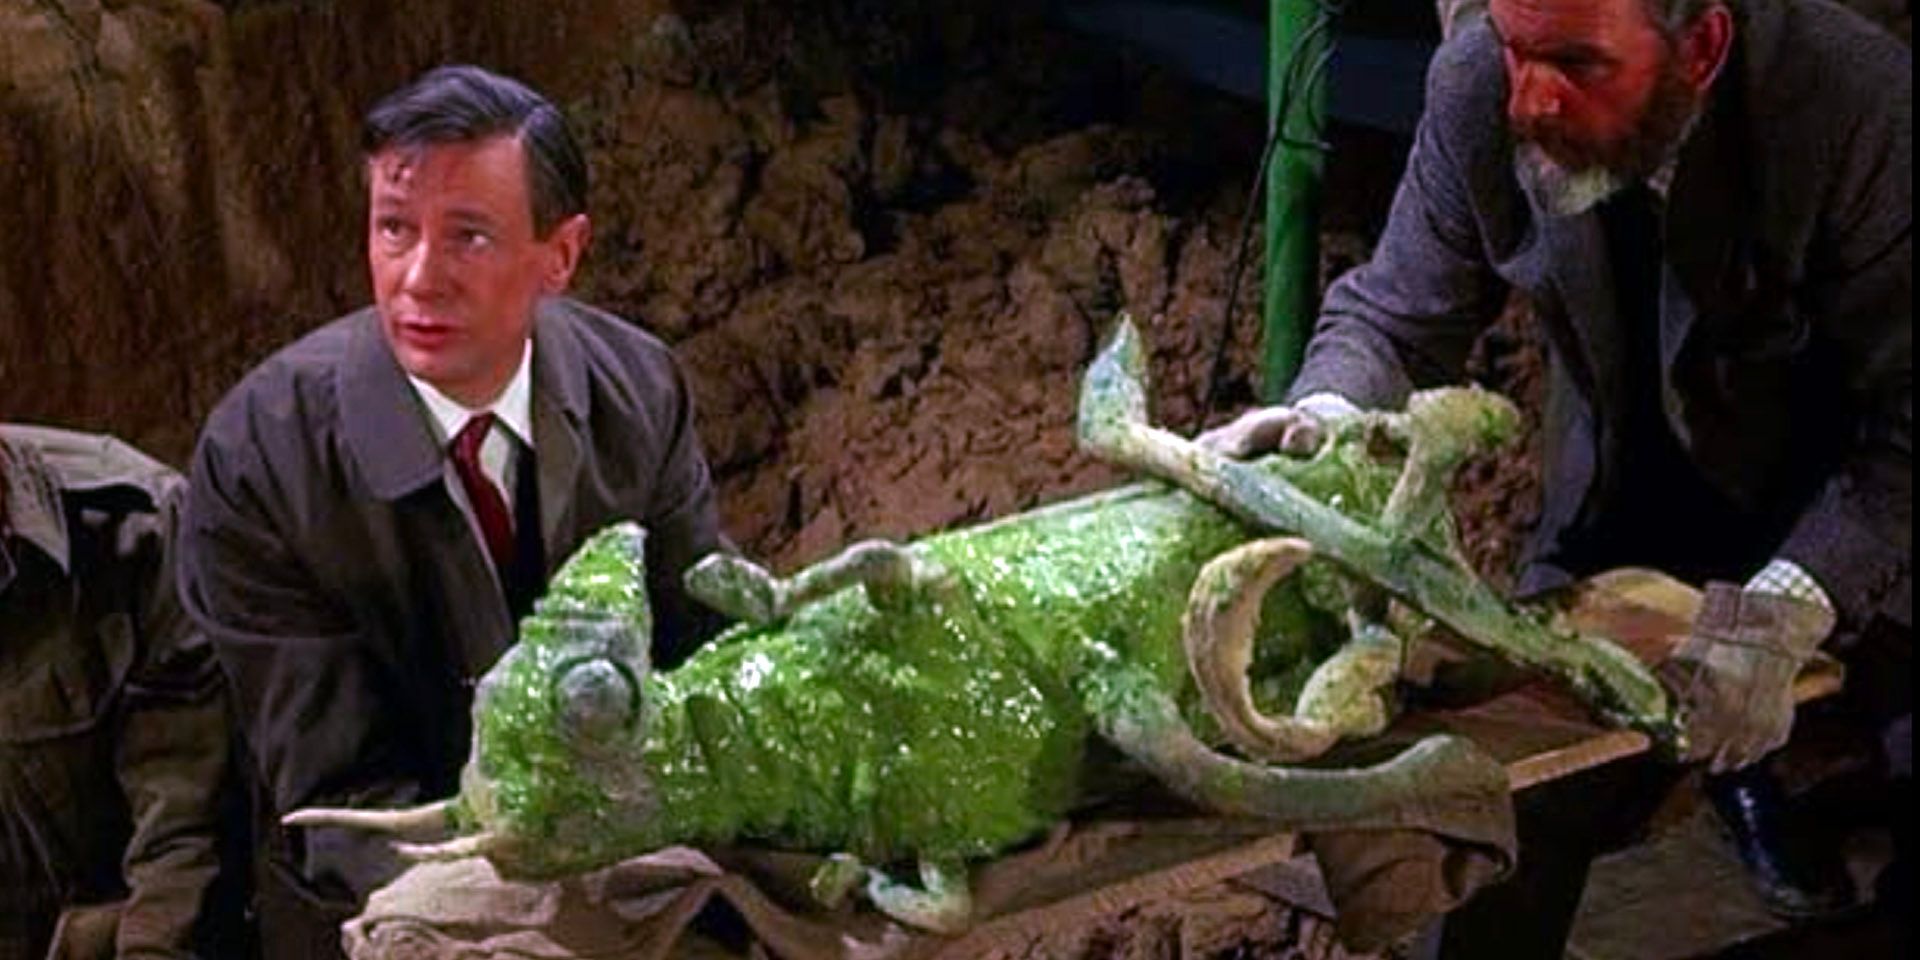 Bernard Quatermass and the creature in the pit